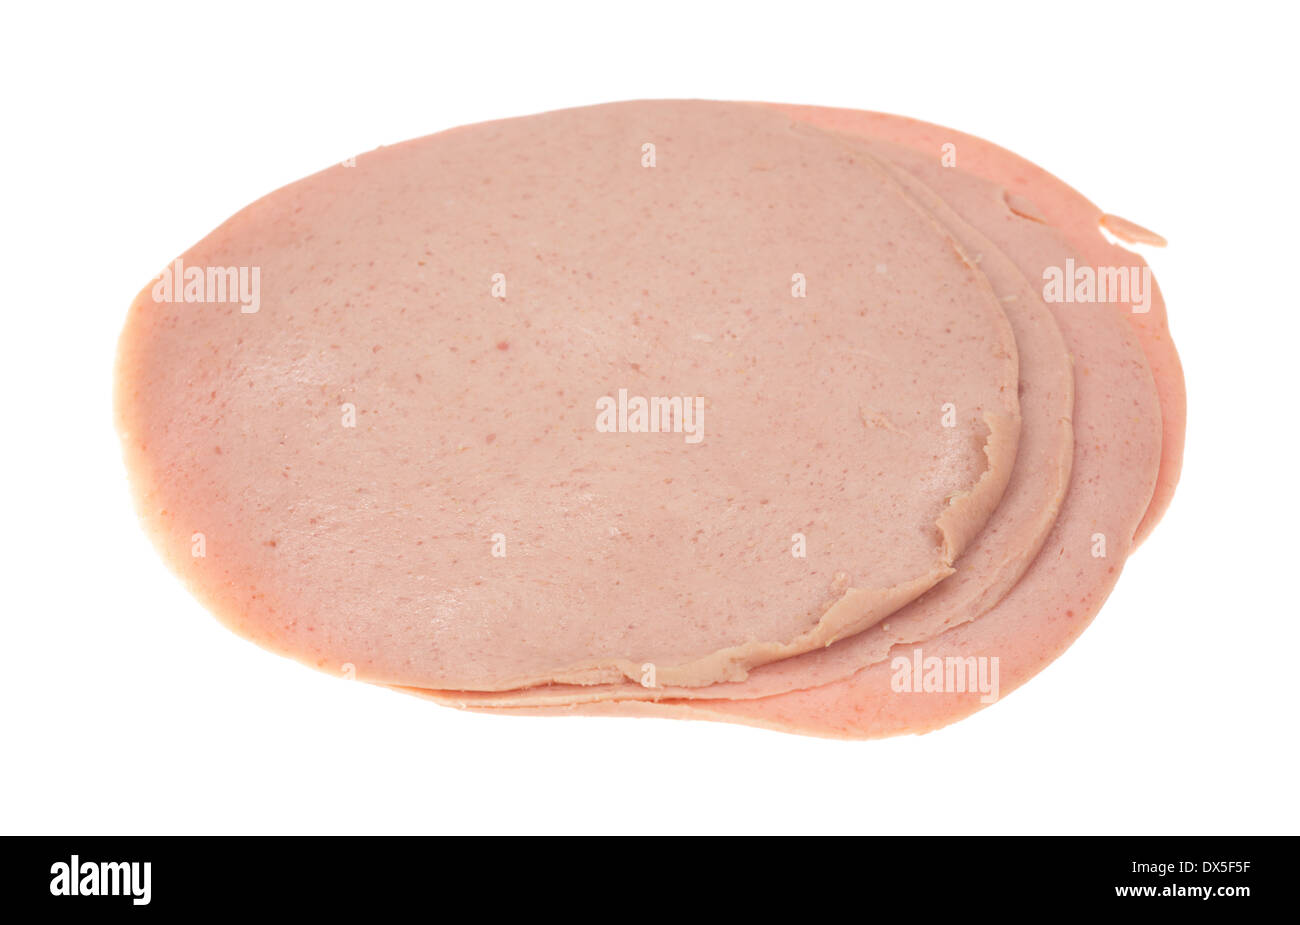 Several thin slices of German baloney on a white background. Stock Photo